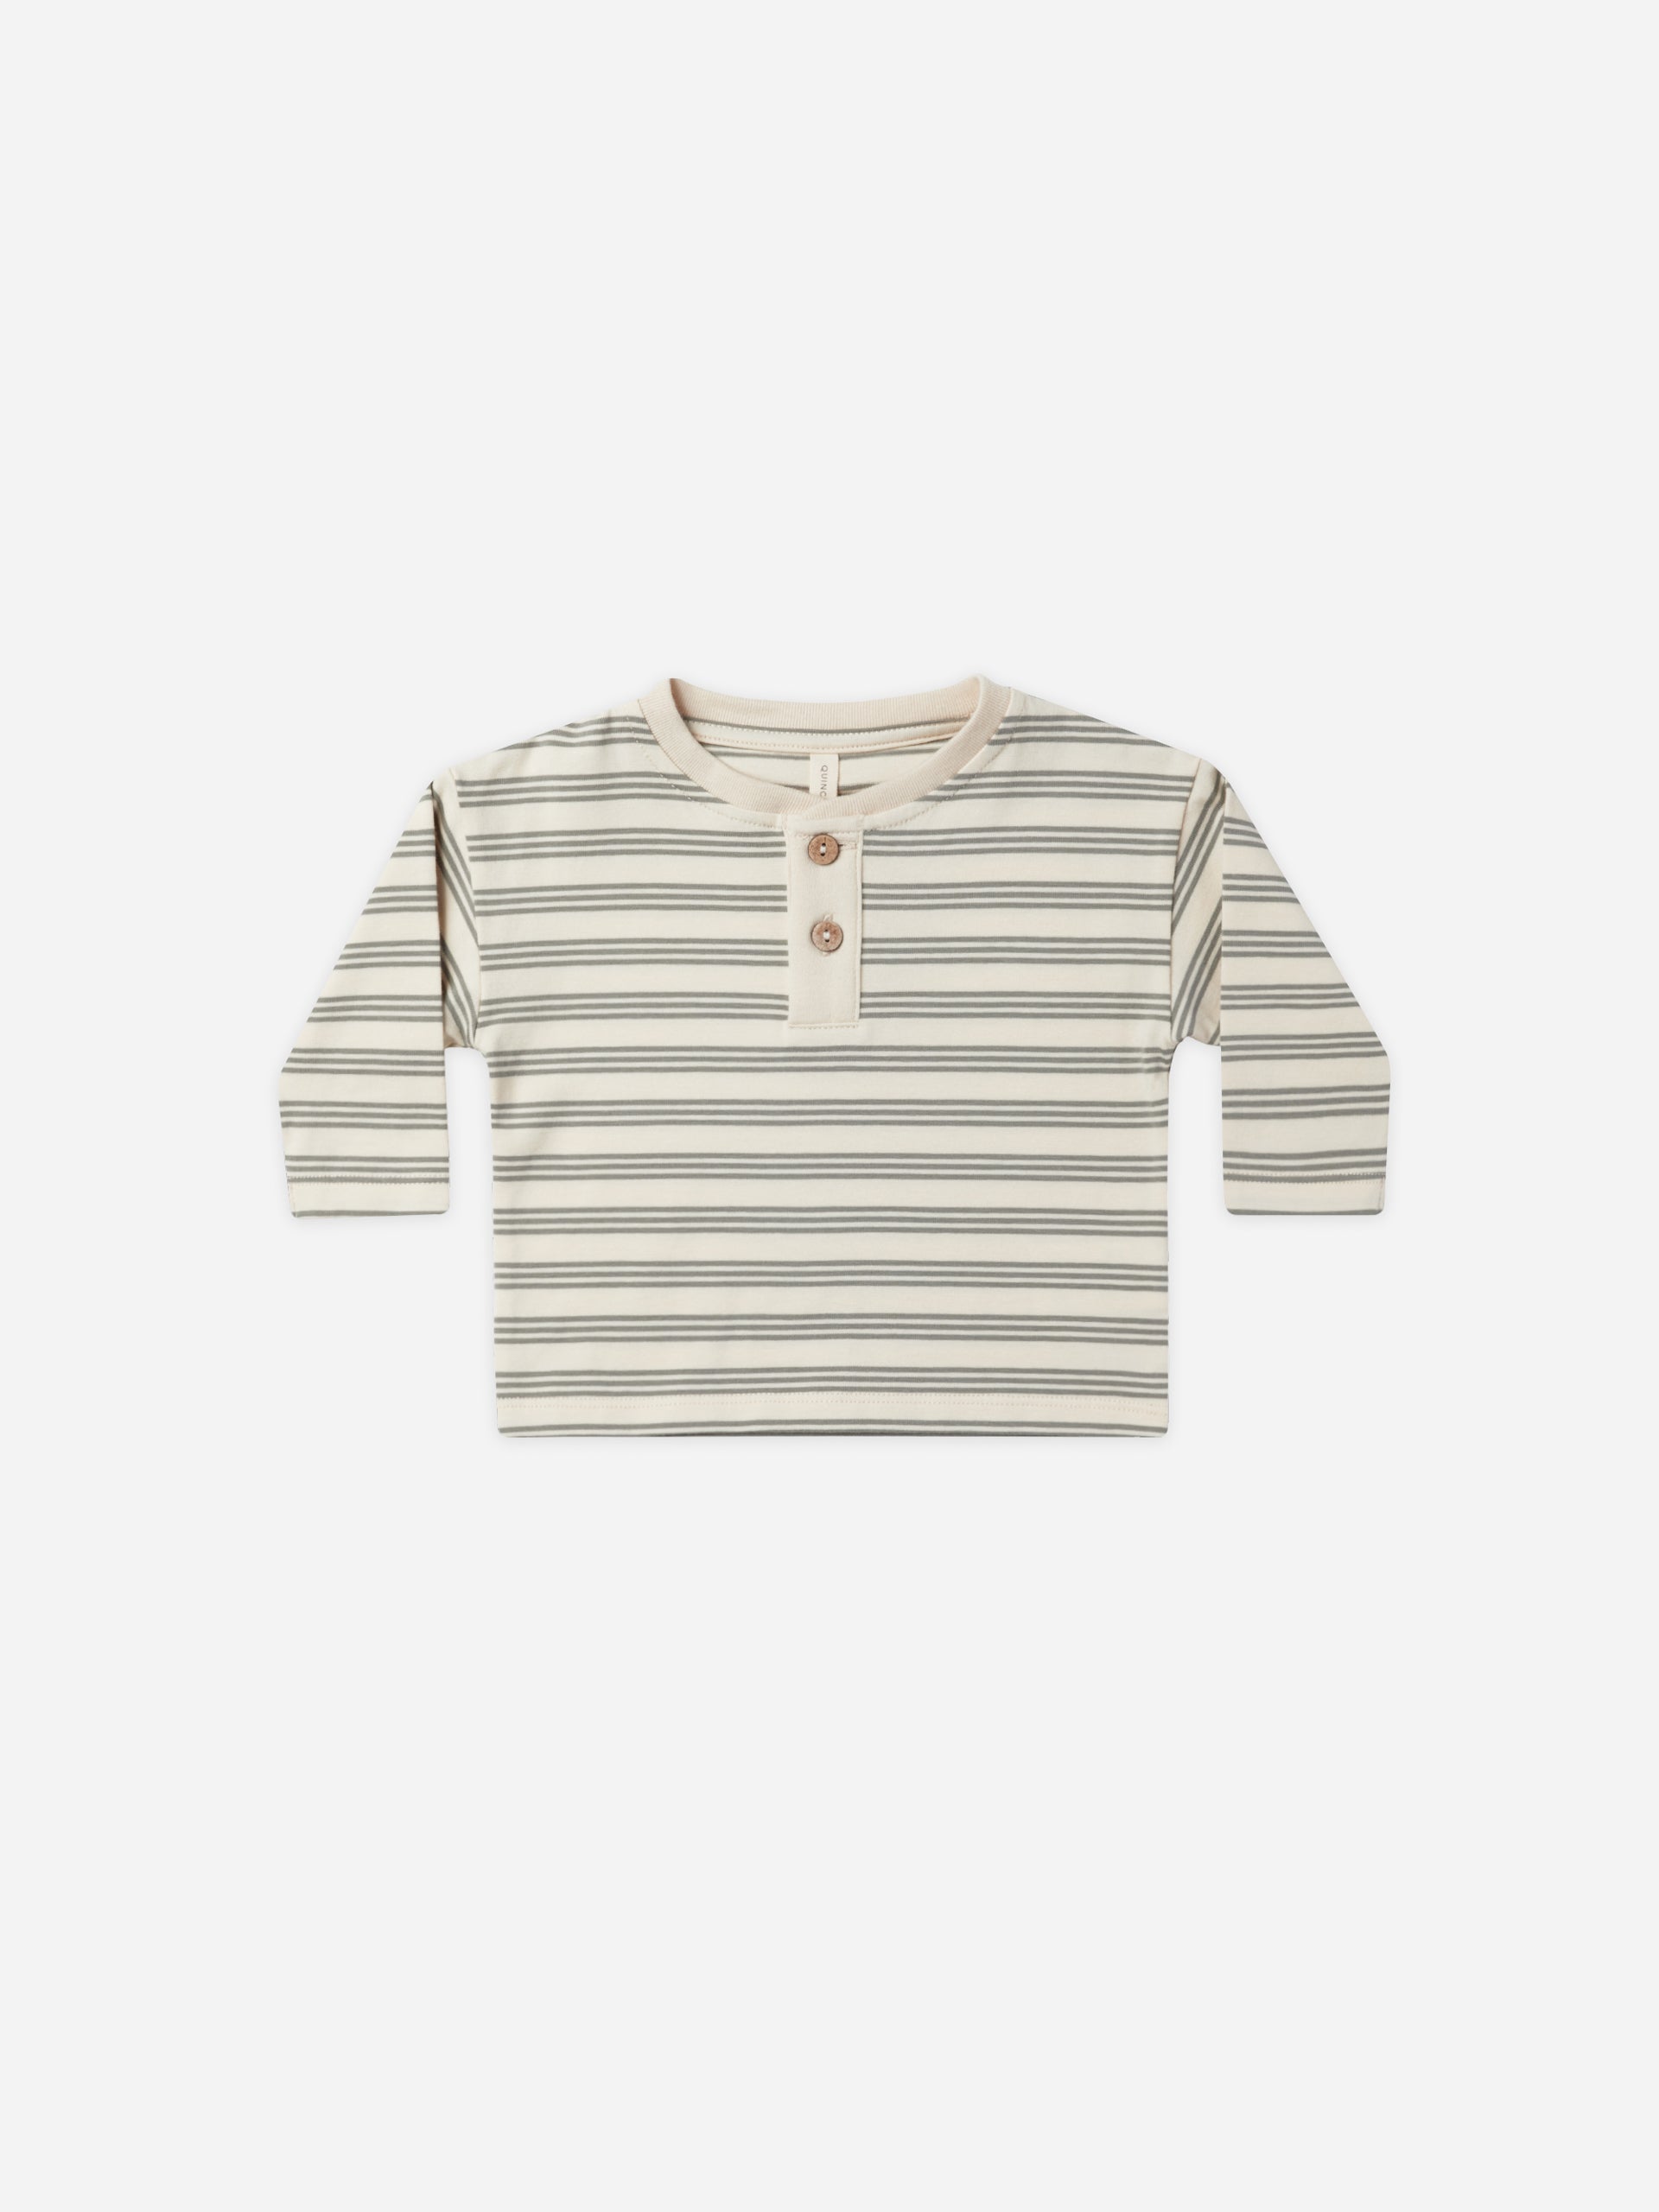 Long Sleeve Henley Tee || Basil Stripe - Rylee + Cru | Kids Clothes | Trendy Baby Clothes | Modern Infant Outfits |